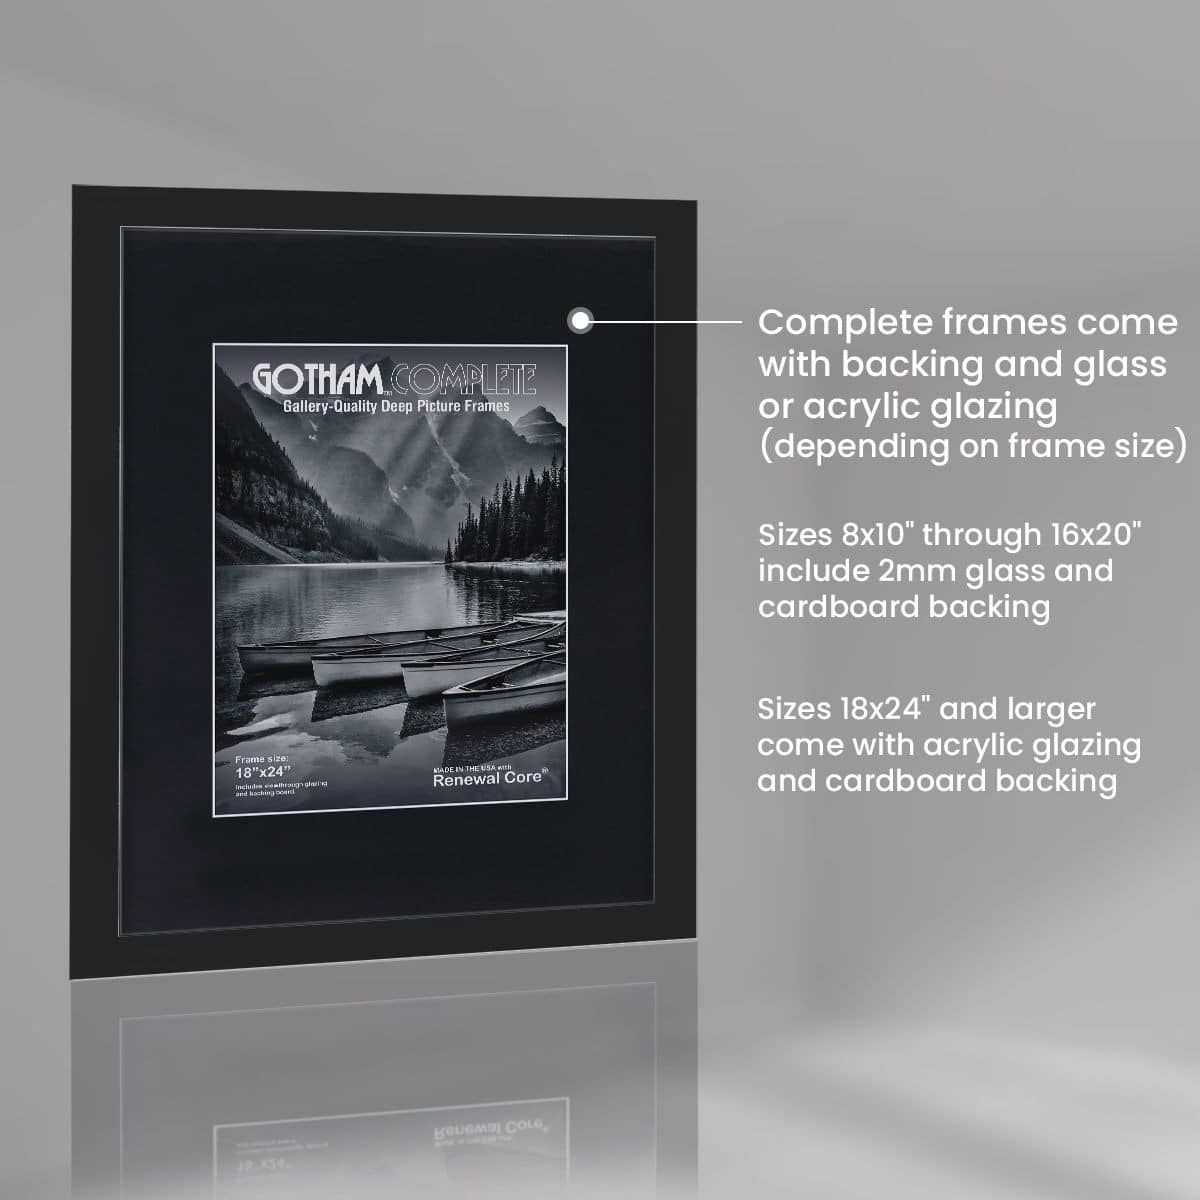 Complete frames come with backing and glass or acrylic glazing (depending on frame size)